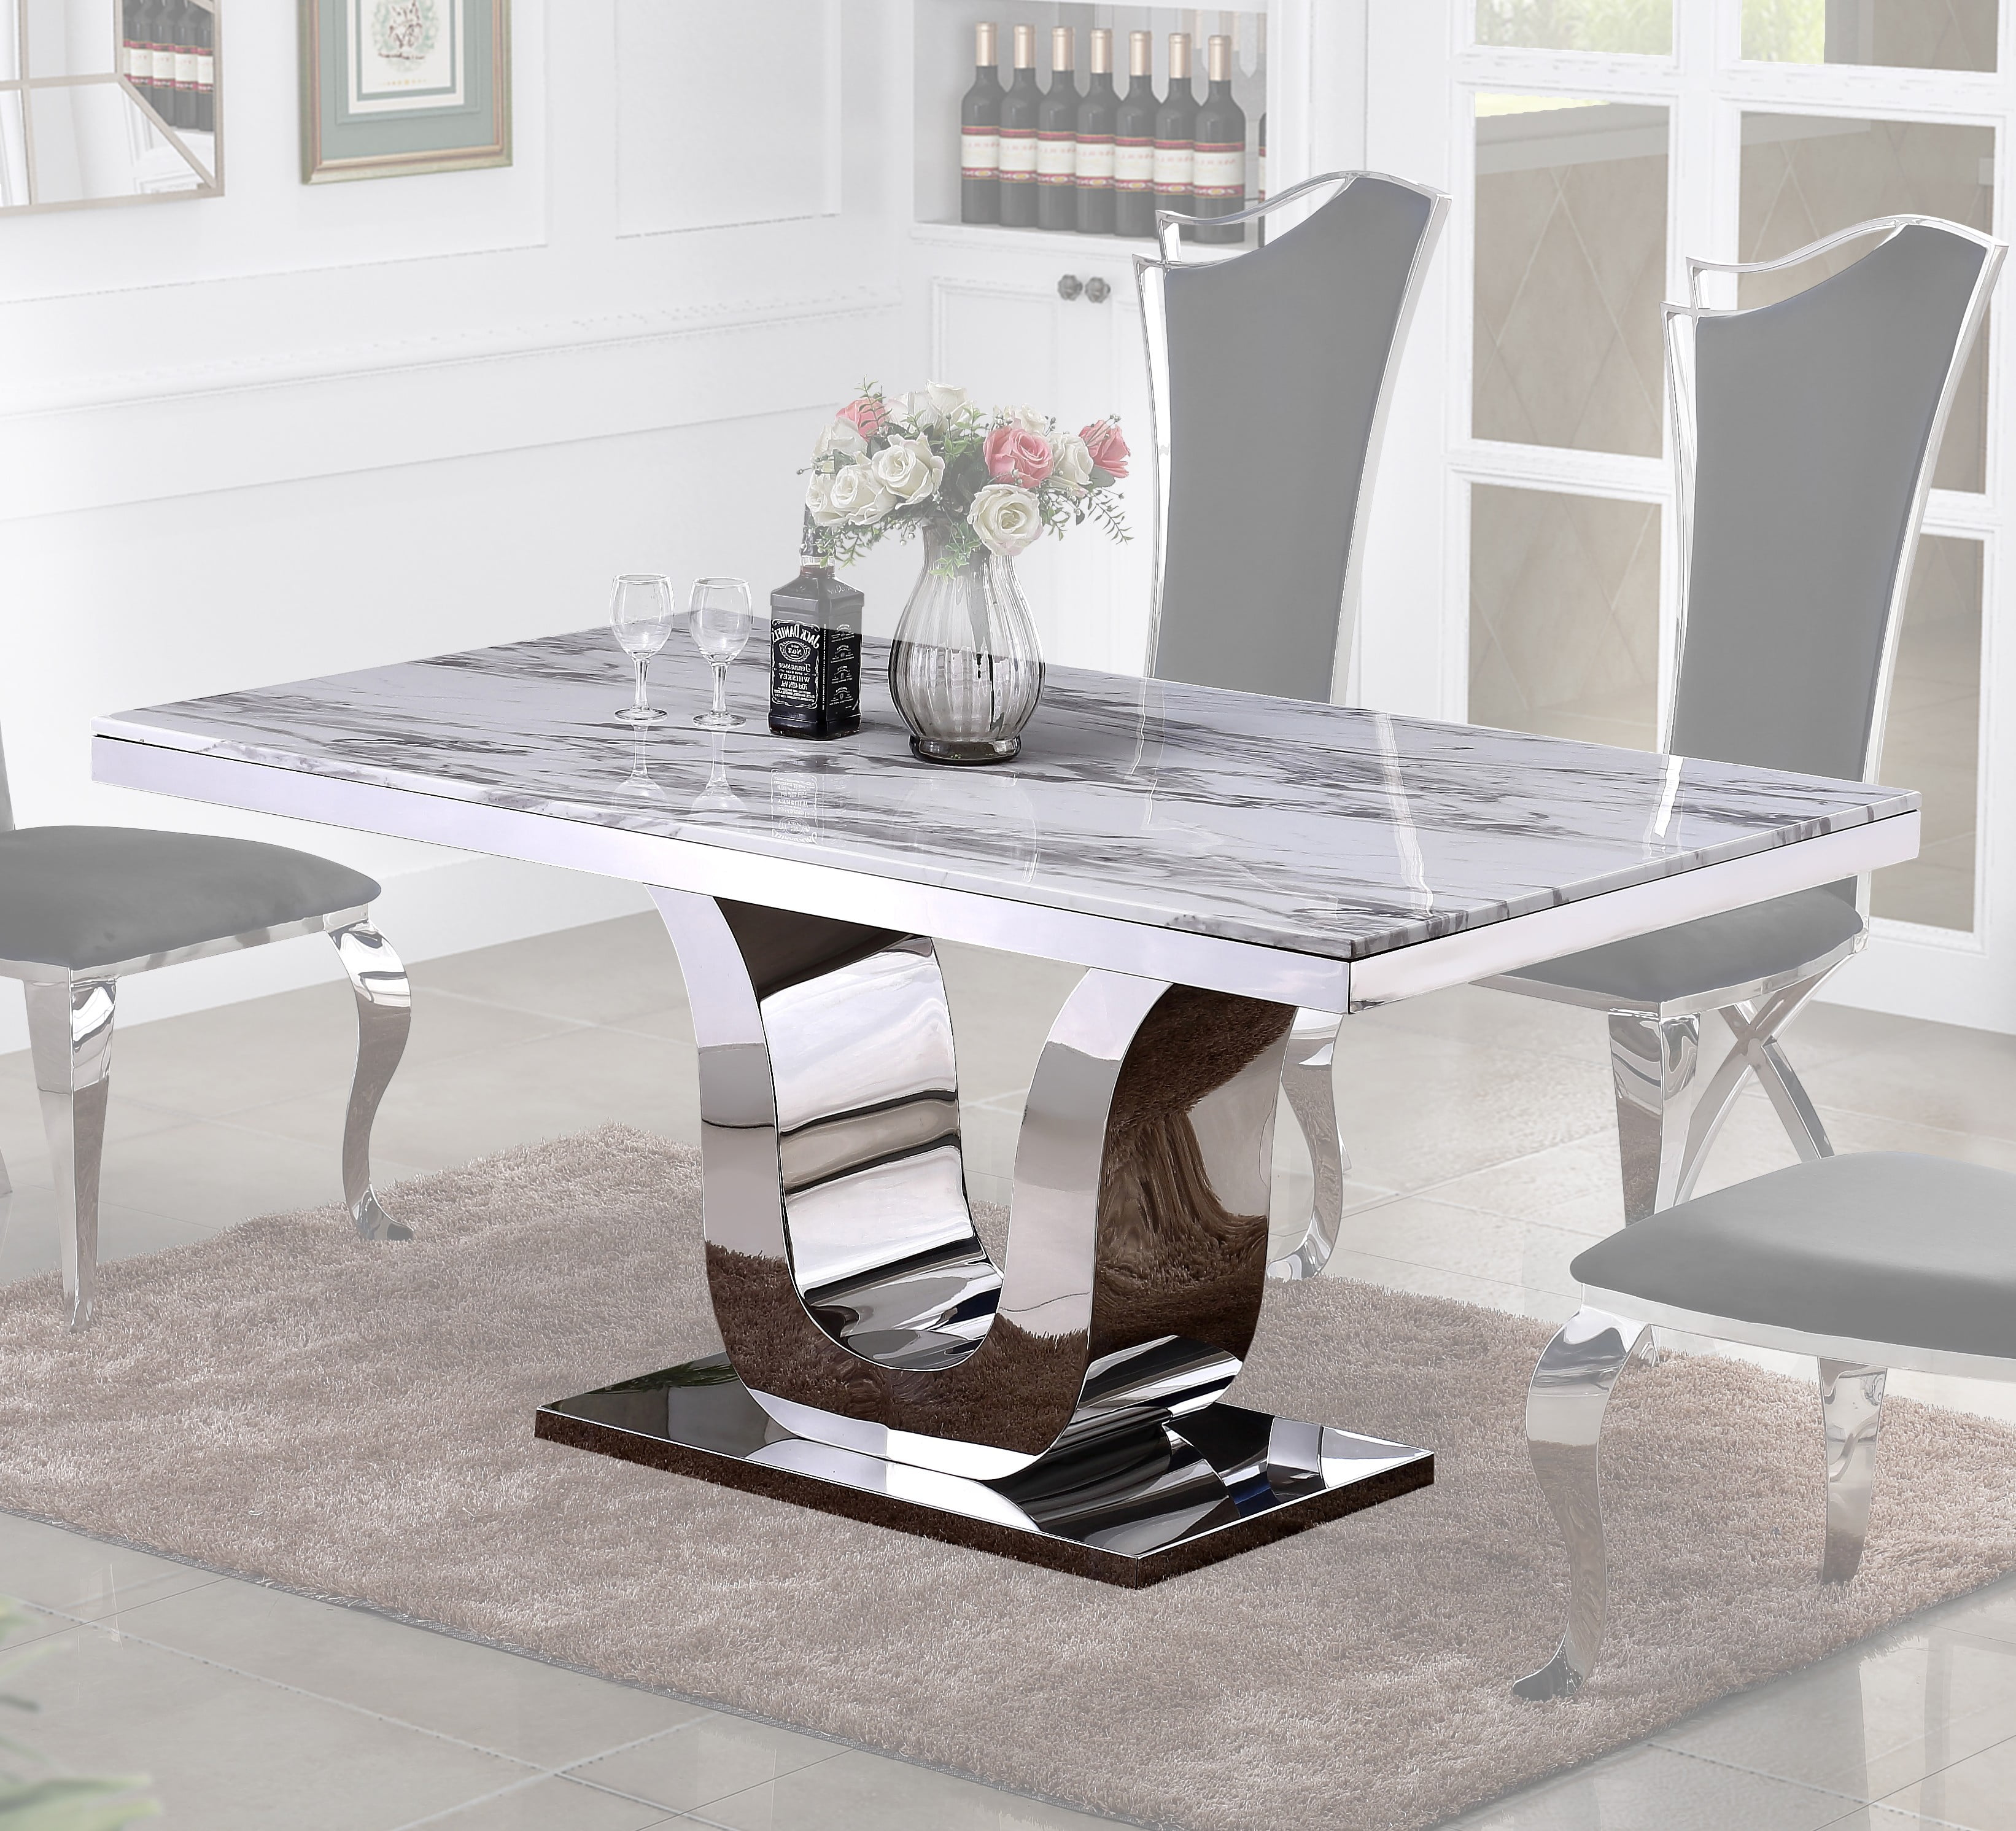 Stainless Steel Base Dining Table, Steel Dining Room Table Base